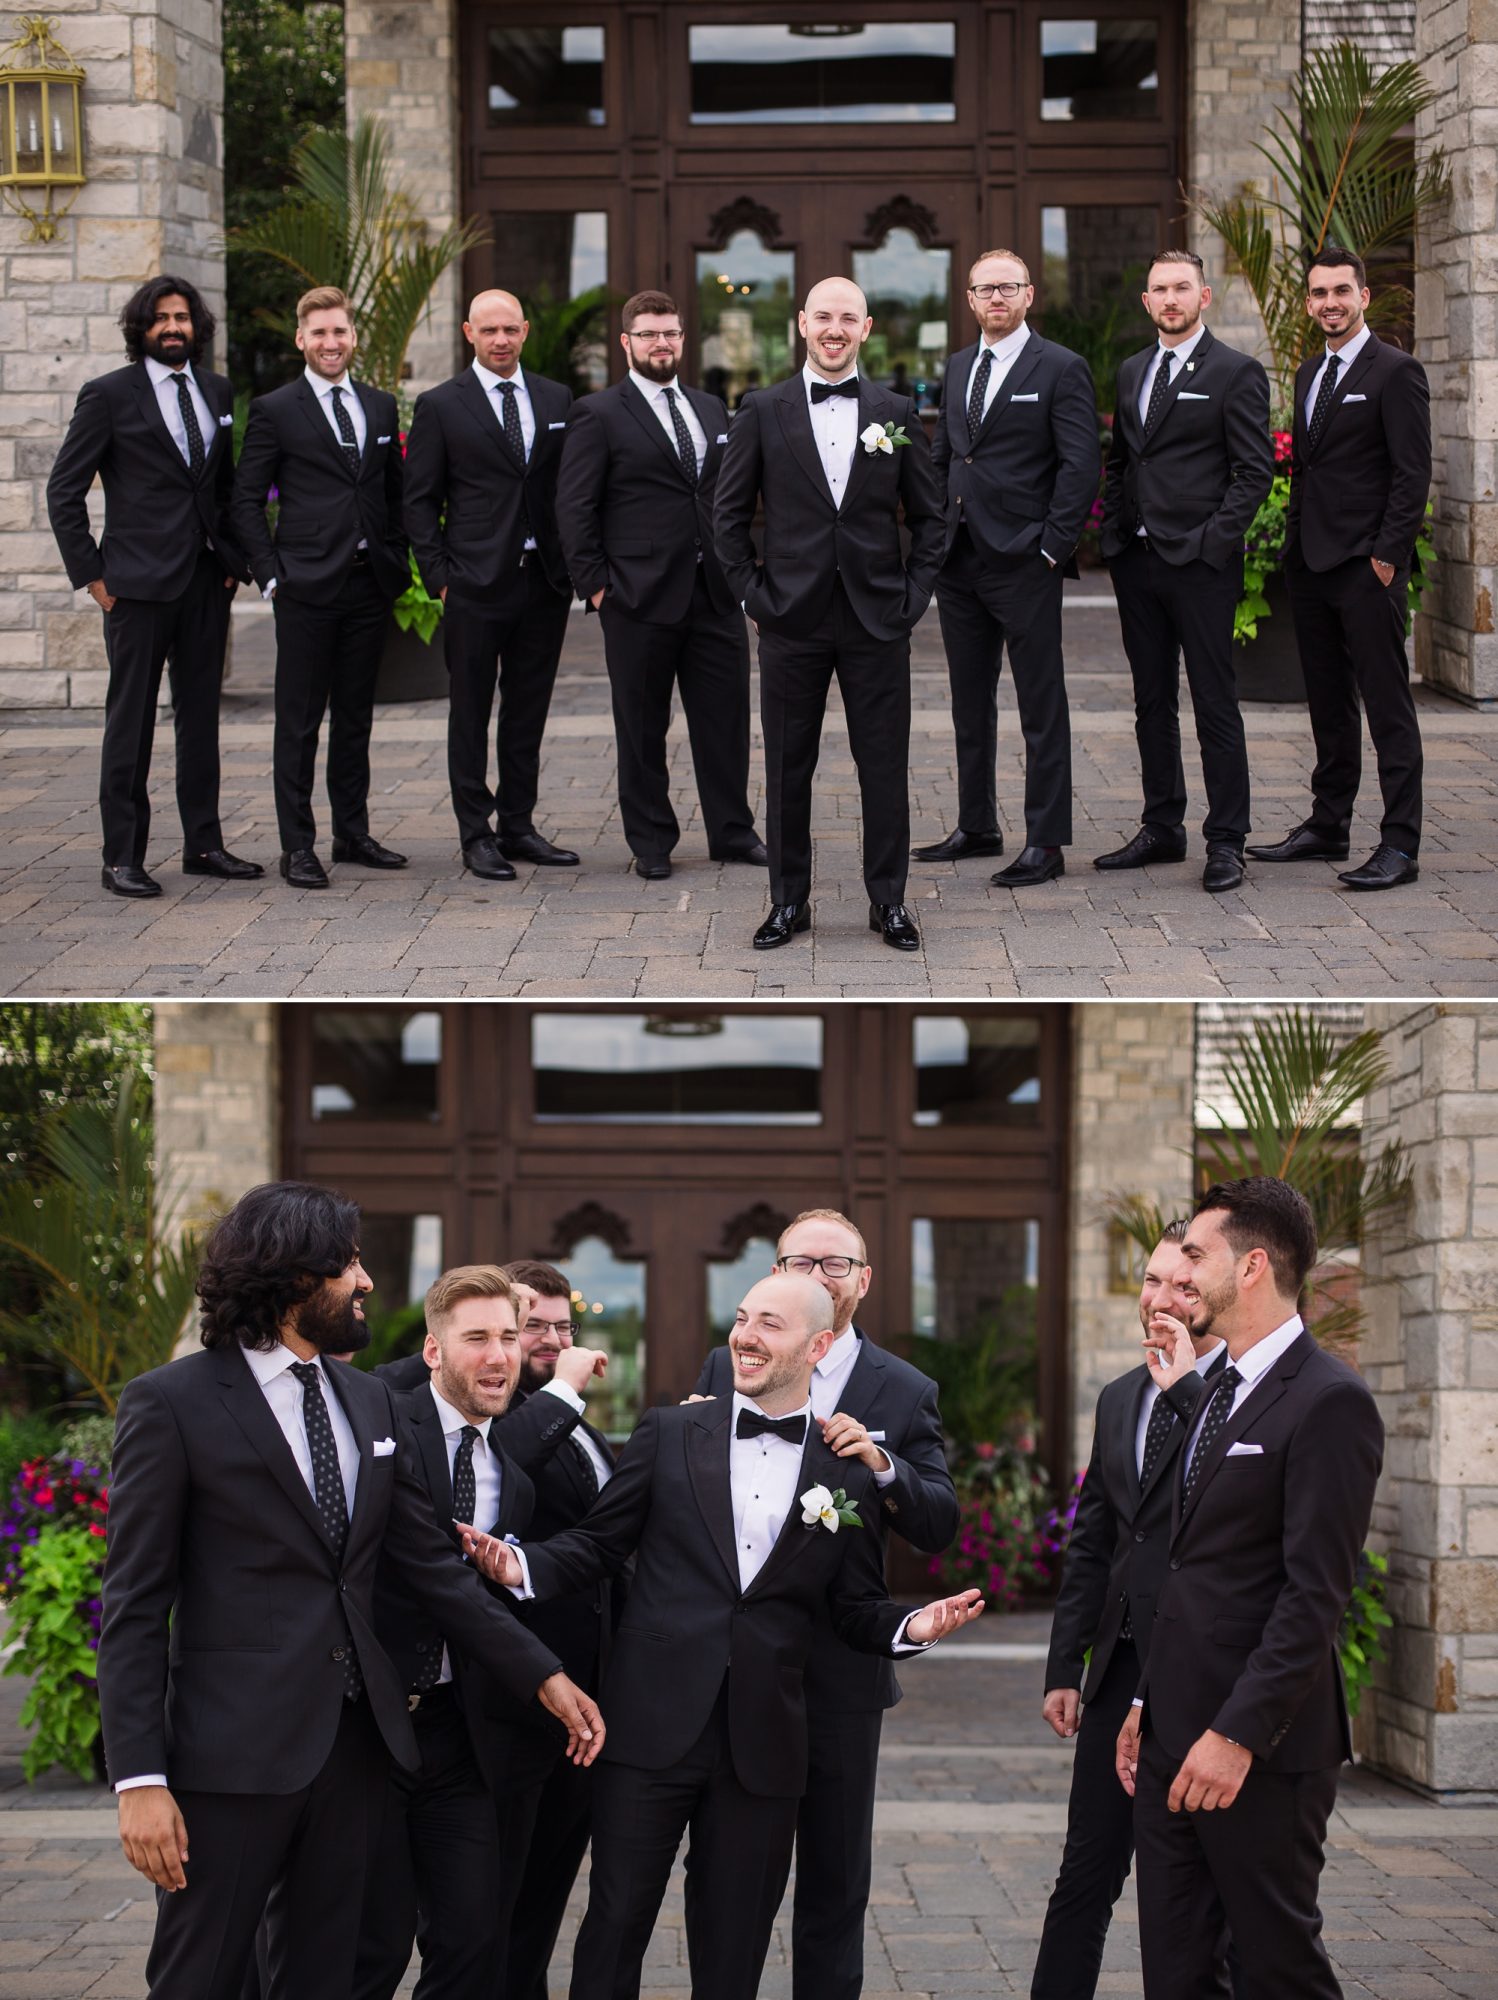 Toronto Wedding at Eagles Nest. The groom centre forward, followed on either sides by his groomsmen.